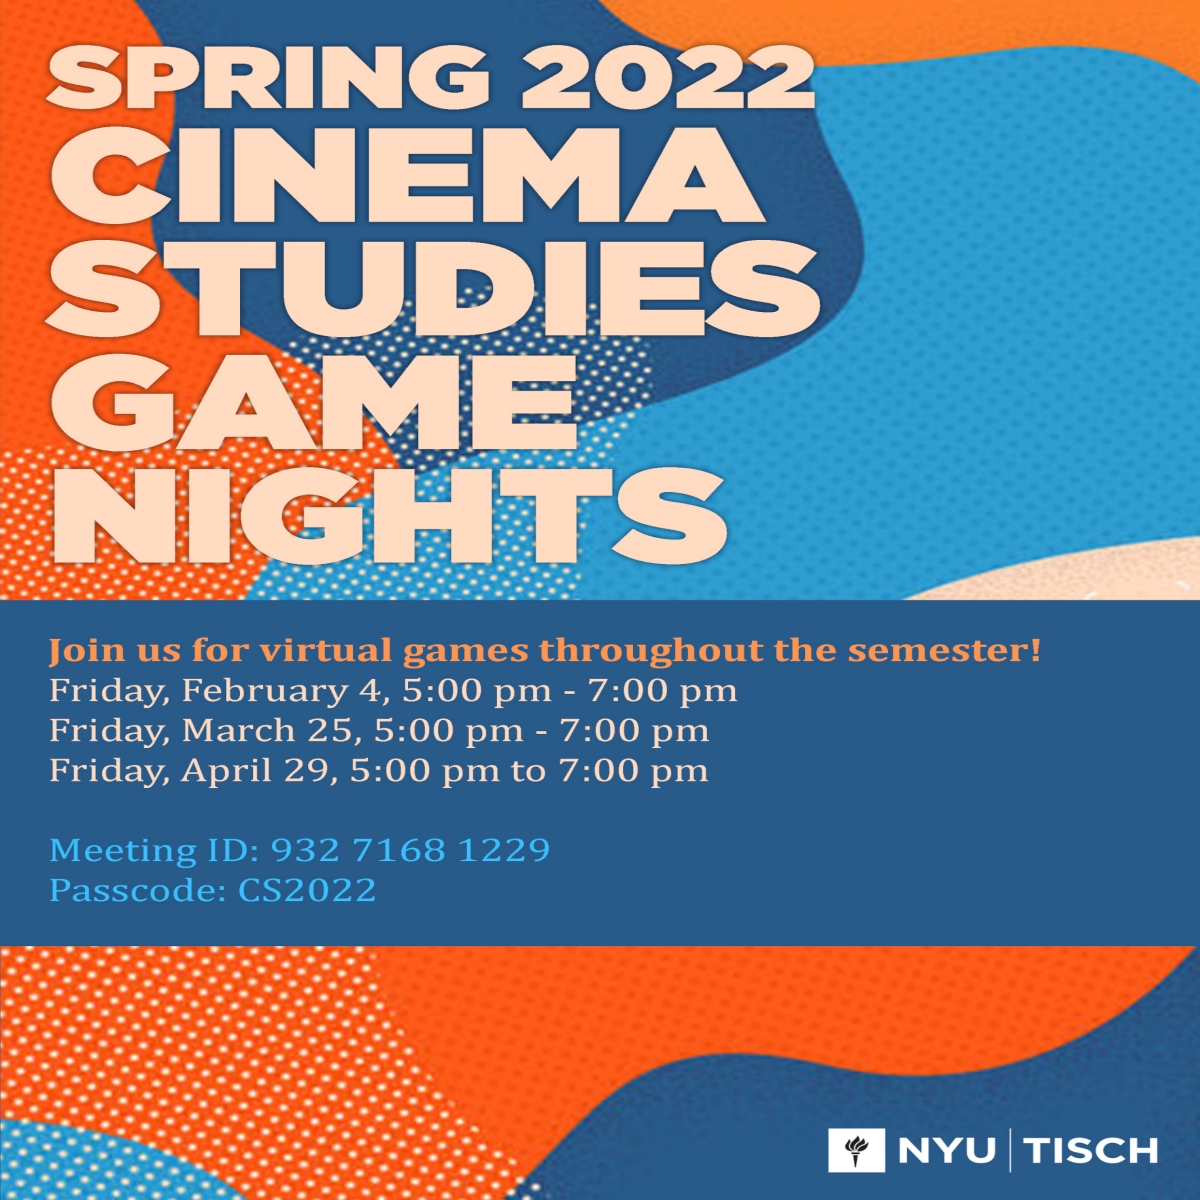 colorful poster that reads: Spring 2022 Cinema Studies Game Nights